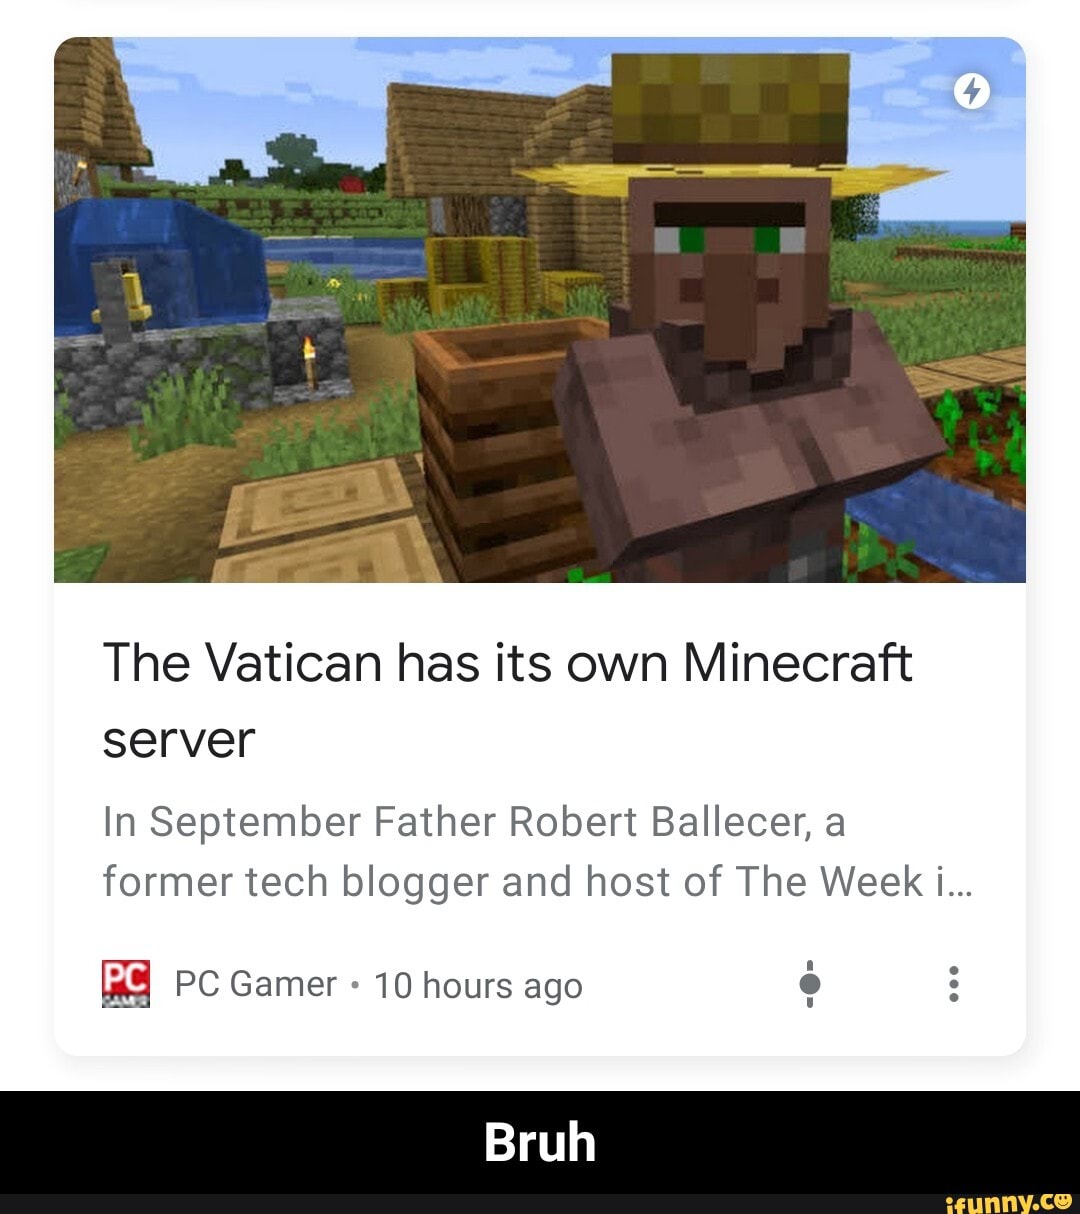 penance Repulsion Dormancy The Vatican has its own Minecraft server In September Father Robert  Ballecer, a former tech blogger and host of The Week i... PC] PC Gamer 10  hours ago E - Bruh - )